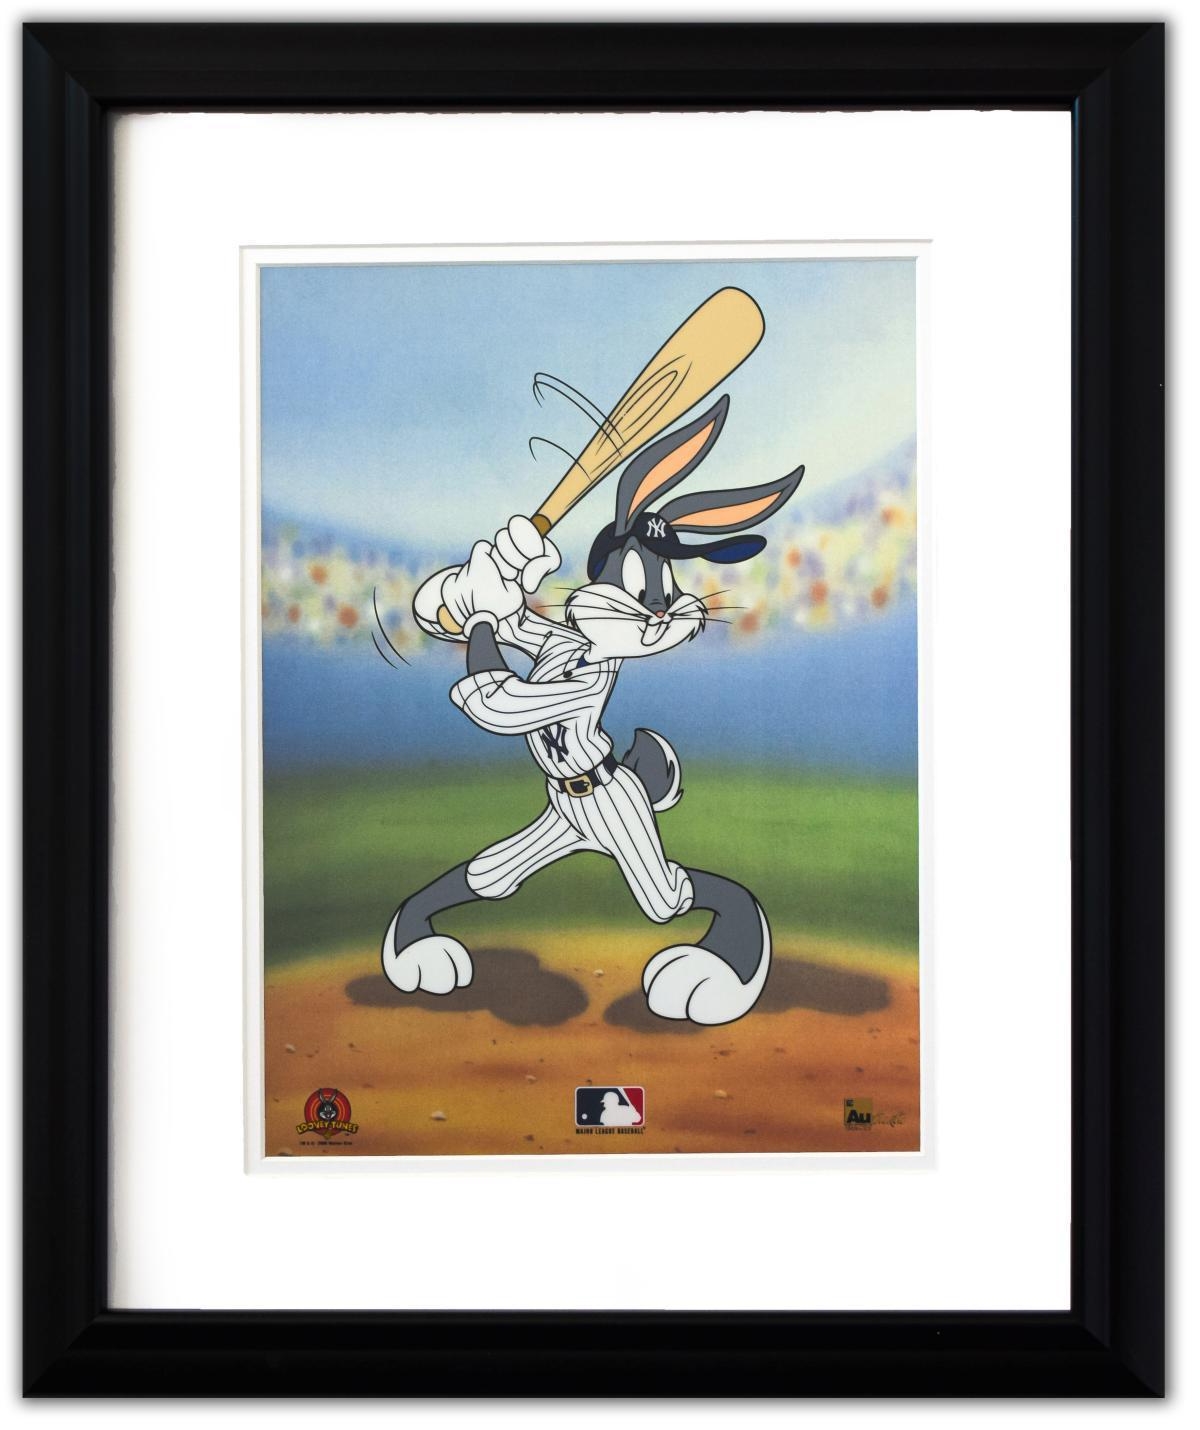 Bugs Bunny at Bat for the Yankees by Warner Brothers